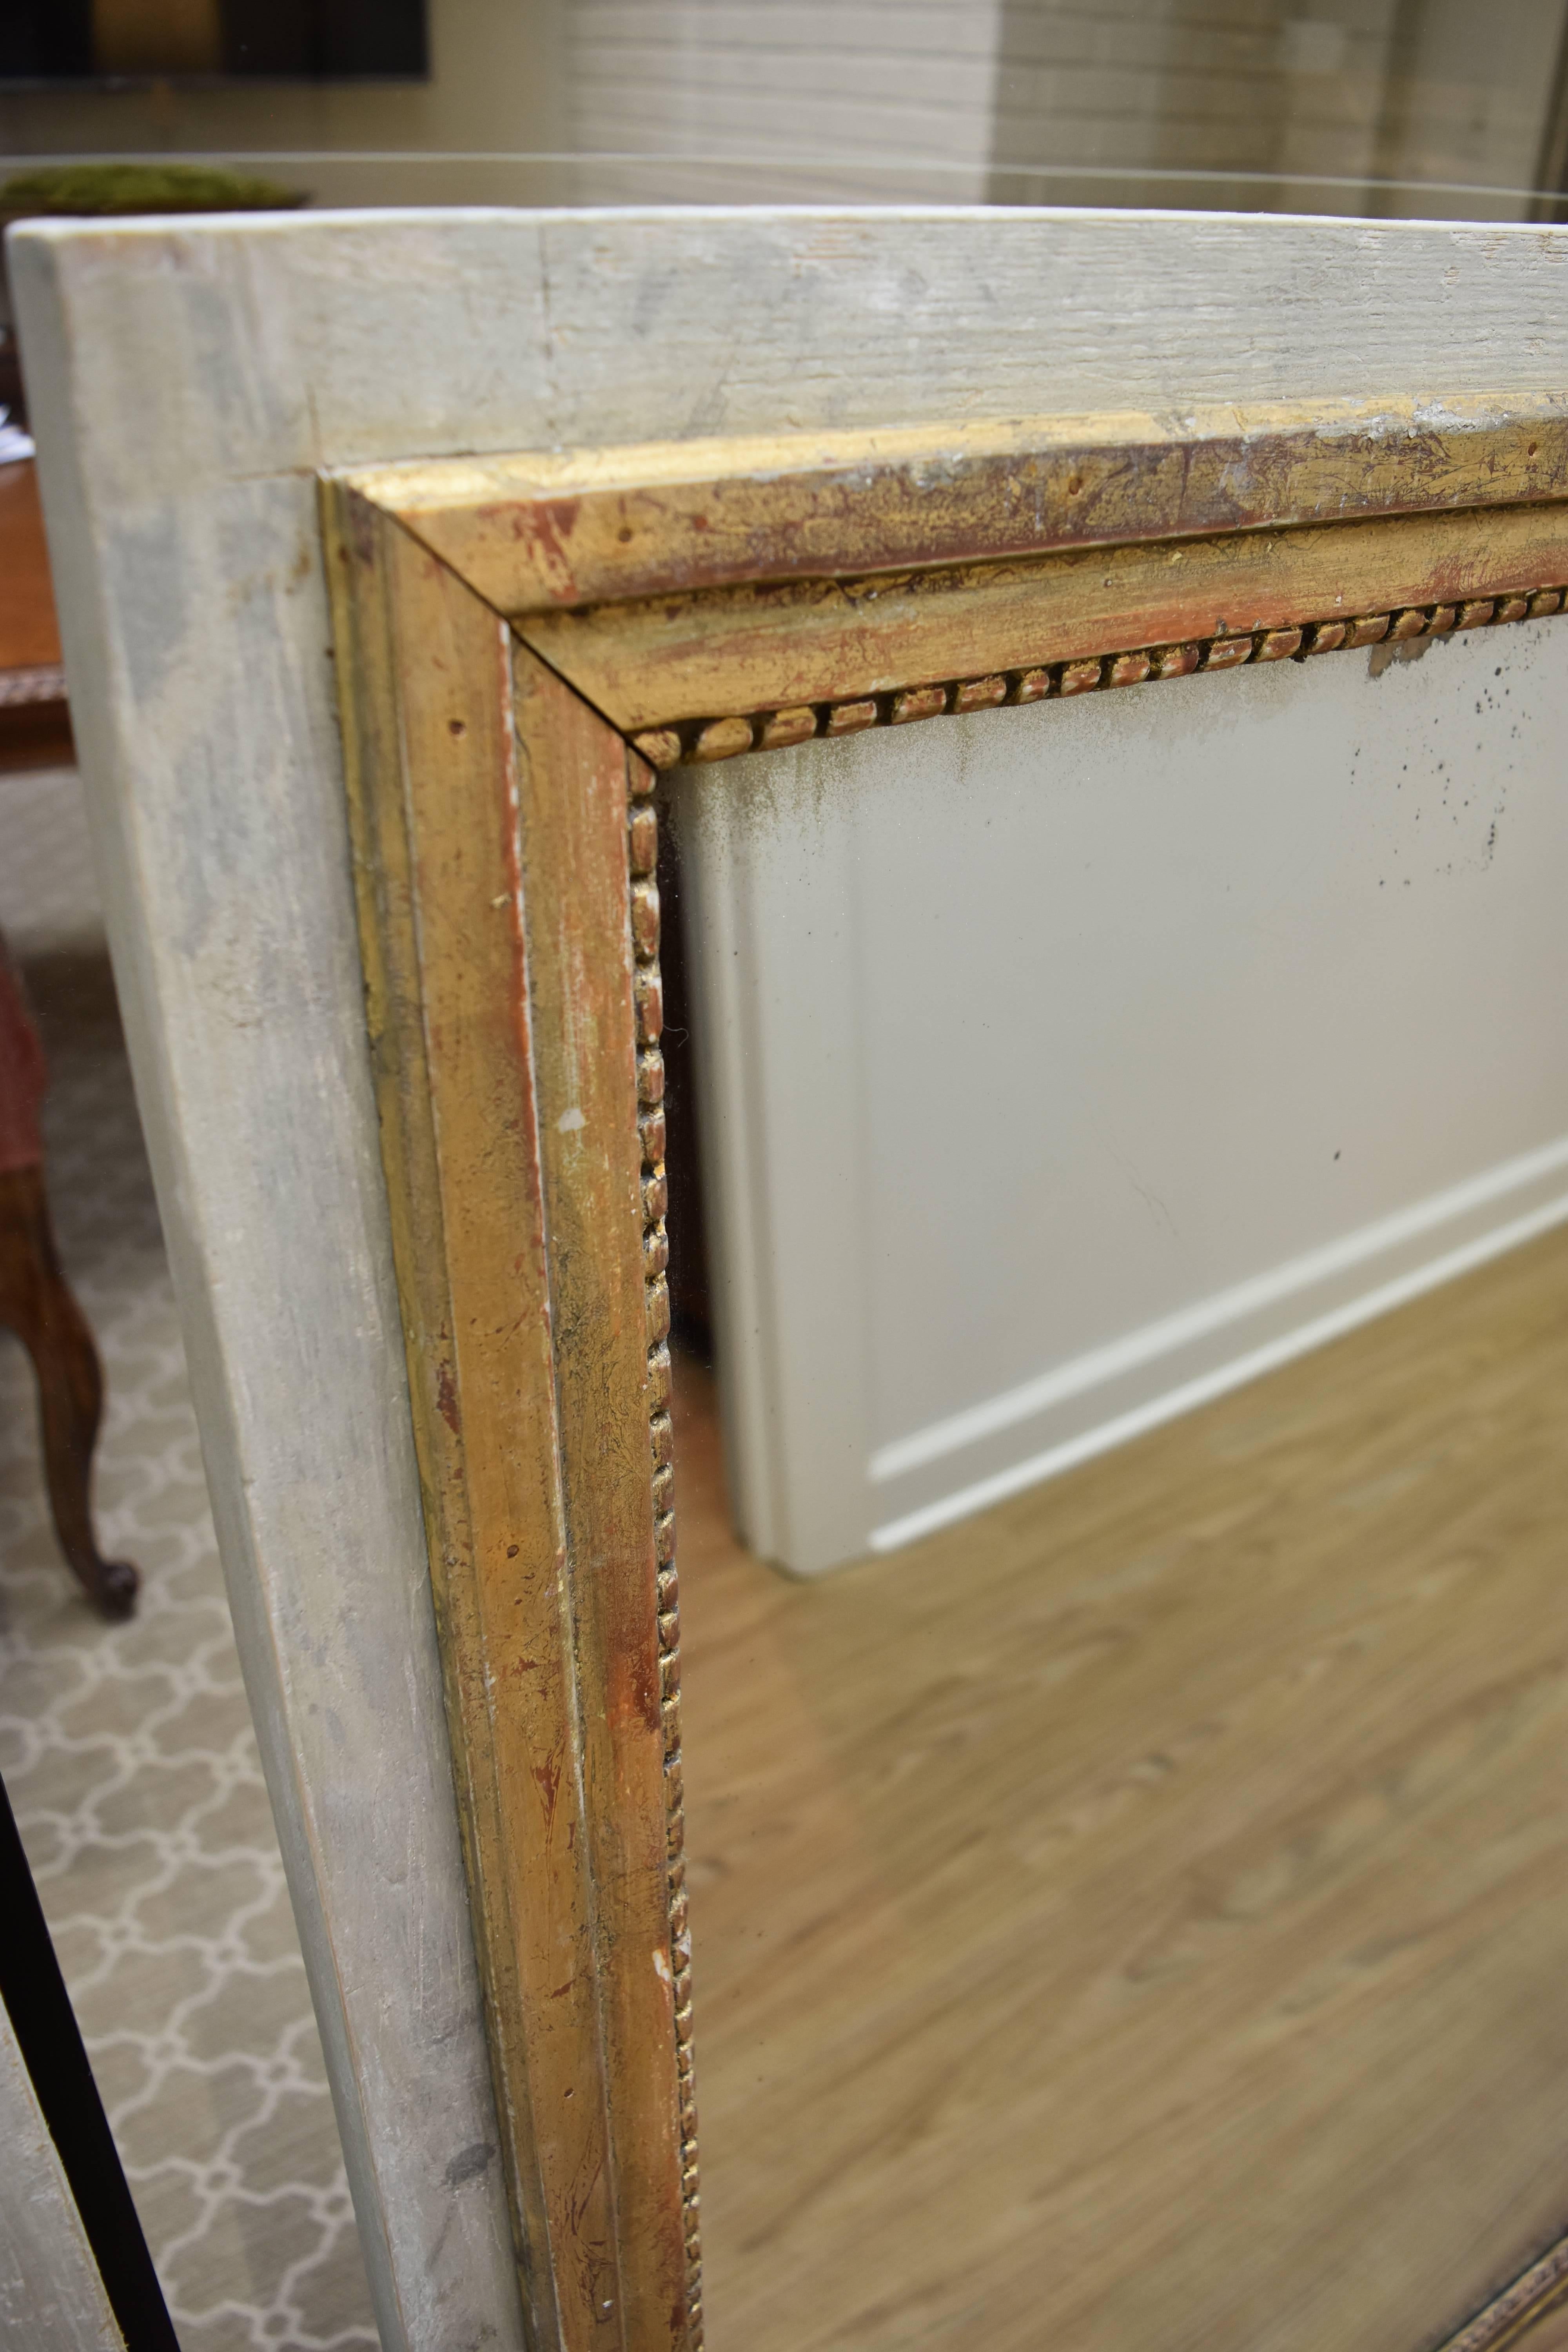 This pair of painted and giltwood mirrors is from the South of France. And while the mirrors are newly constructed, the frames and mirror backs are made entirely of 19th century wood. The plate glass is old with minor distressing and age. The finish